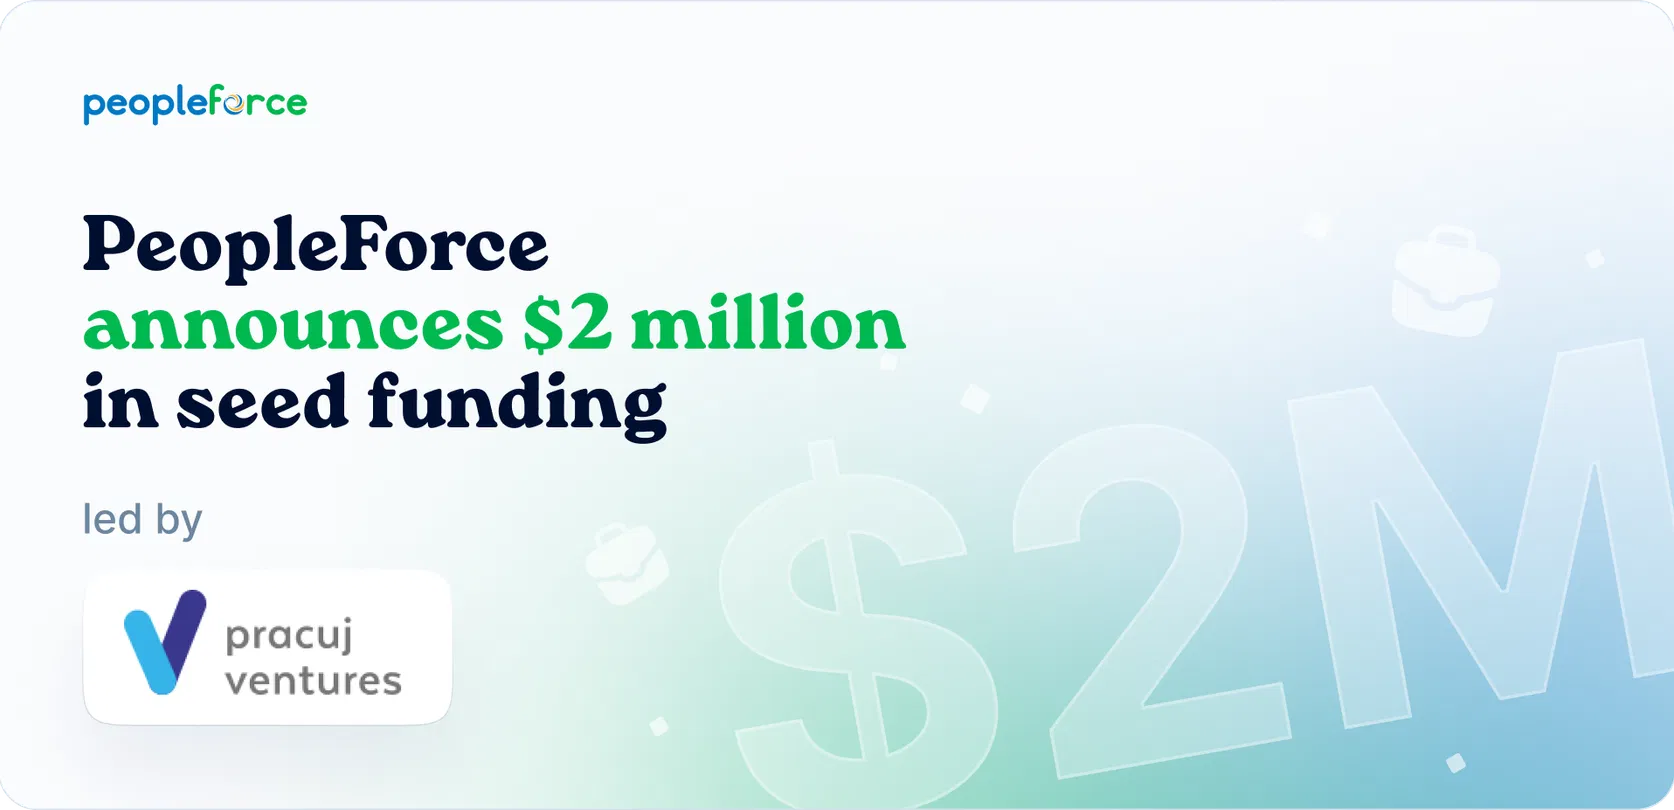 PeopleForce announces $2 million in seed funding